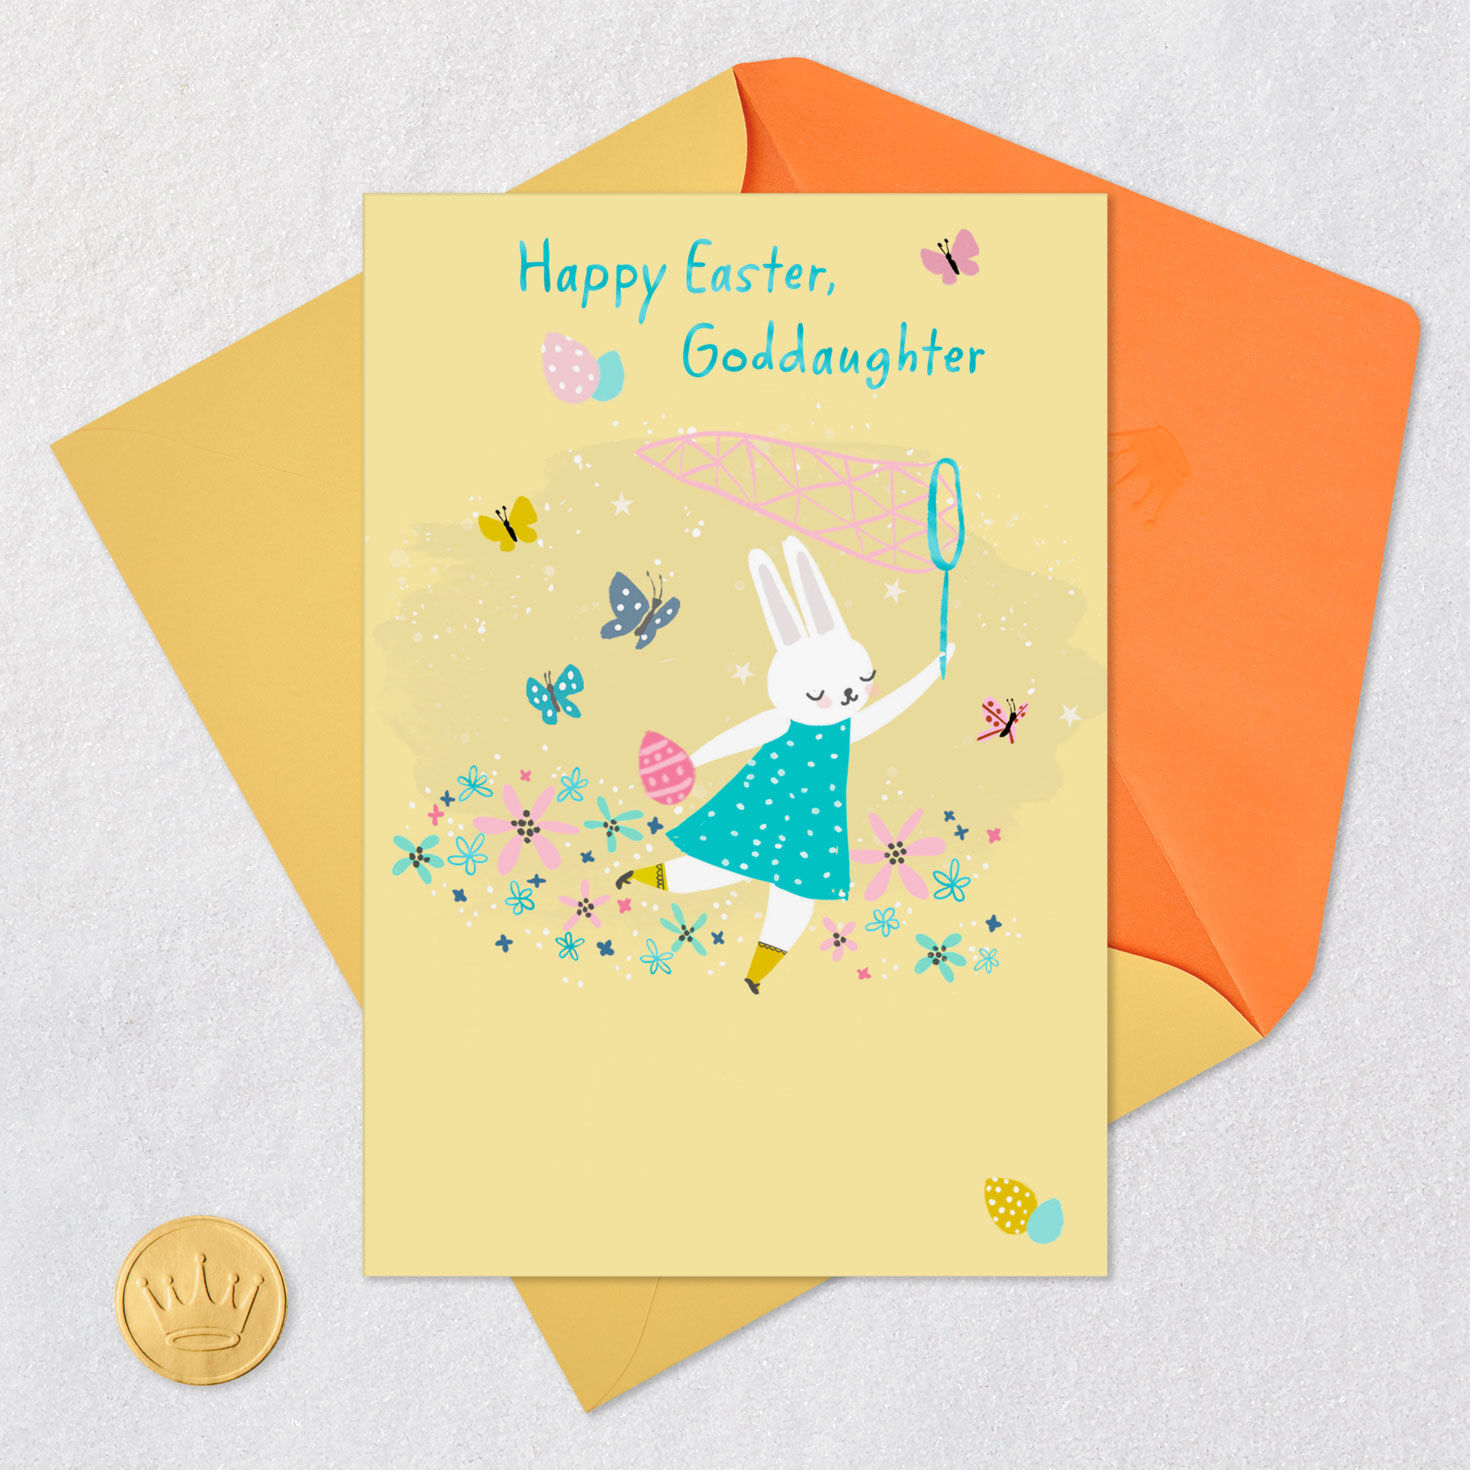 You're One of My Favorites Easter Card for Goddaughter for only USD 2.99 | Hallmark